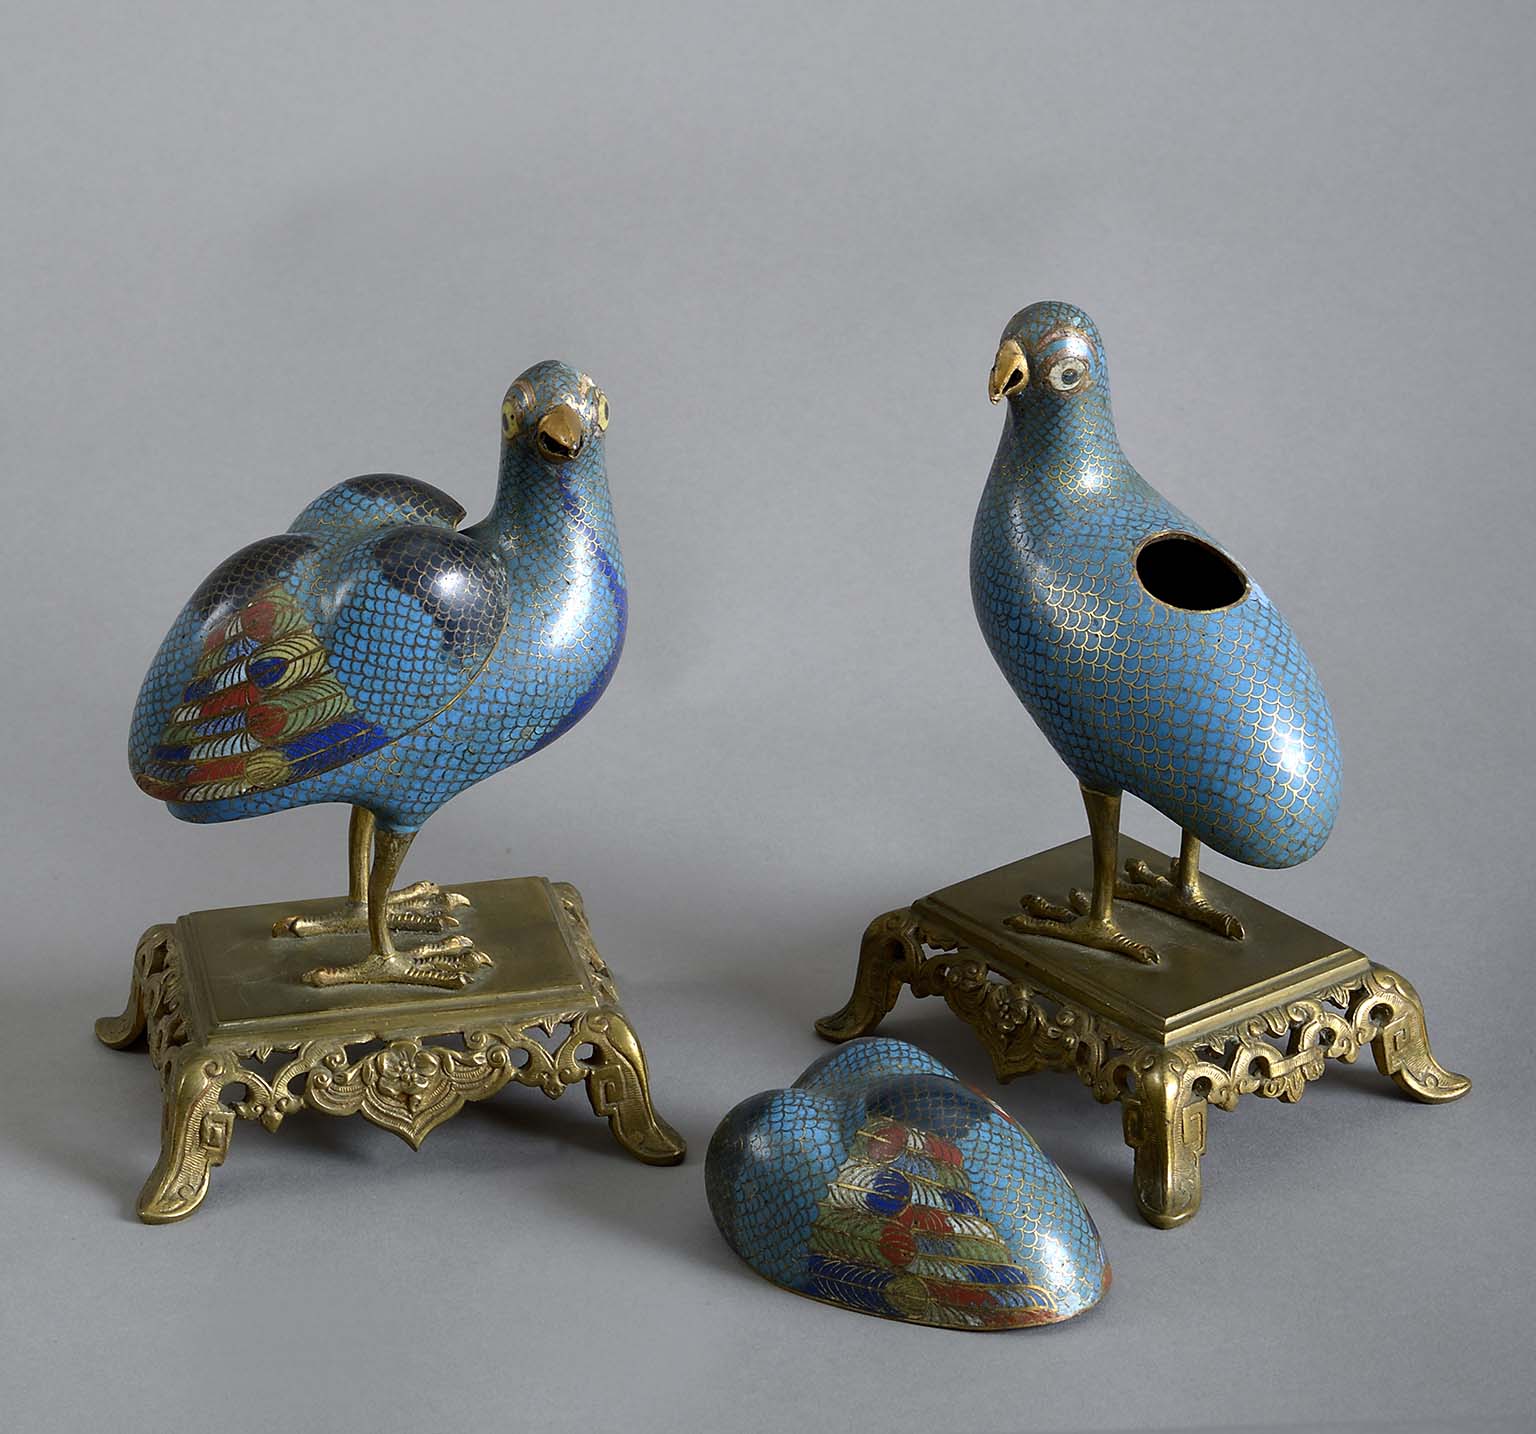 Pair of Chinese Cloisonne Quail Incense Burners